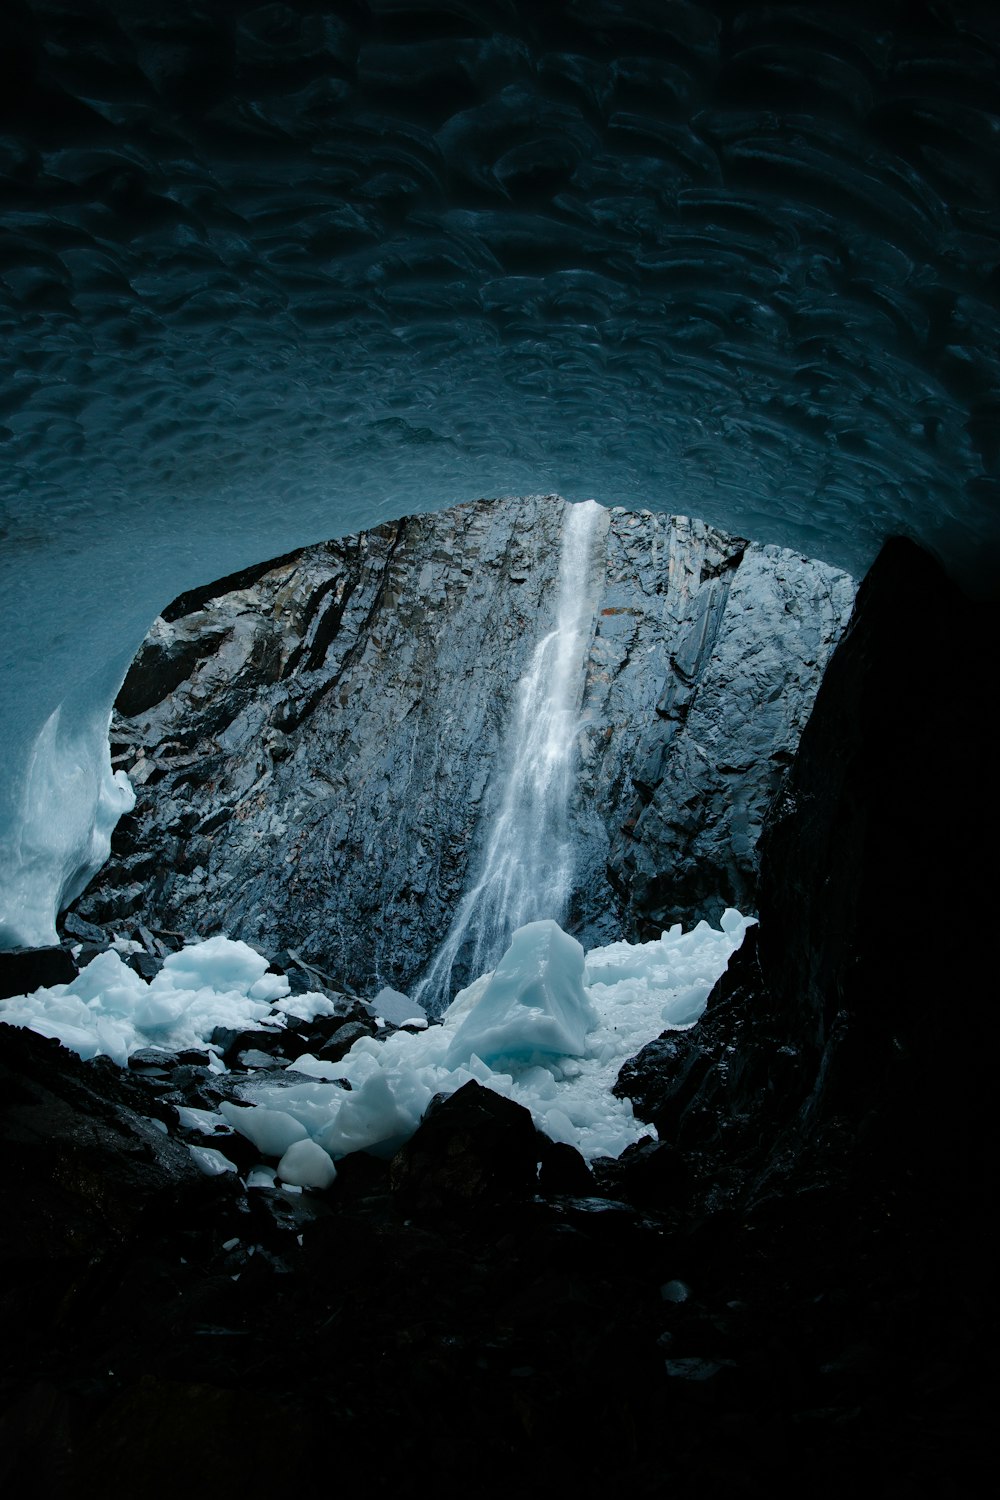 a large ice cave with a waterfall coming out of it